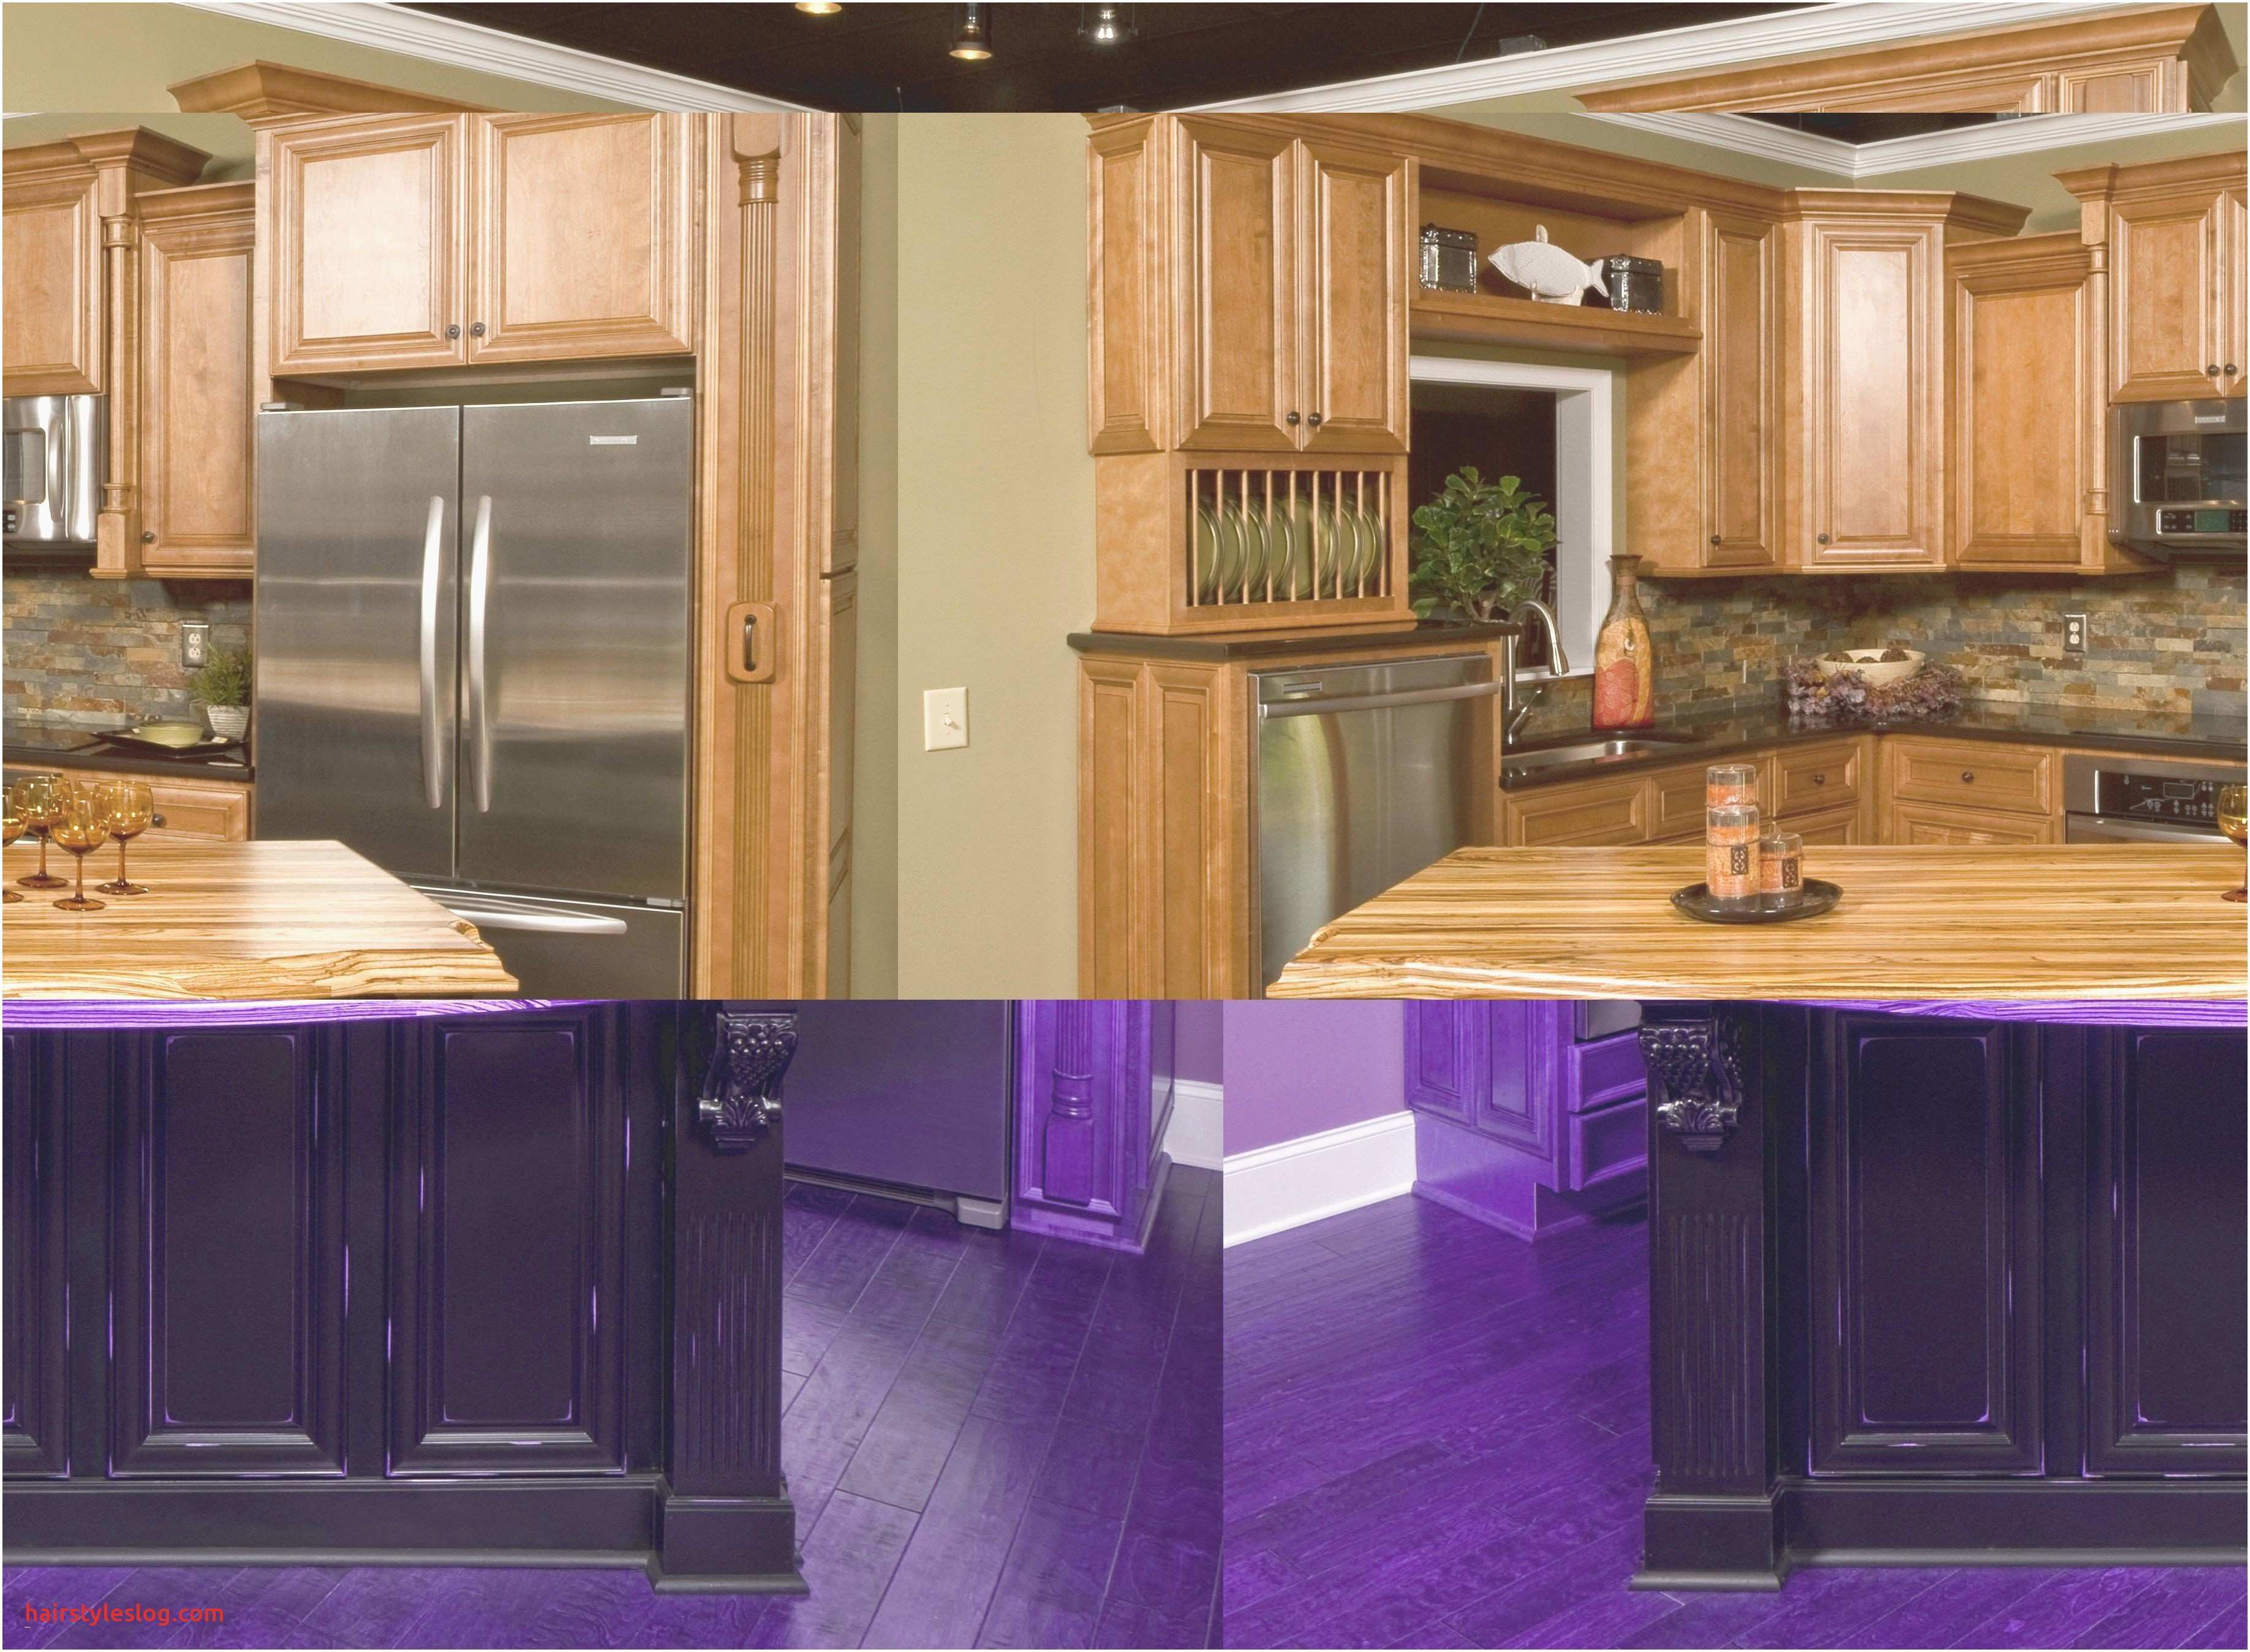 cheapest hardwood flooring options of luxurious and splendid cheap kitchen cabinets philadelphia for within ceiling cheap kitchen cabinets philadelphia decor kitchen cabinets wholesale kitchen ideas